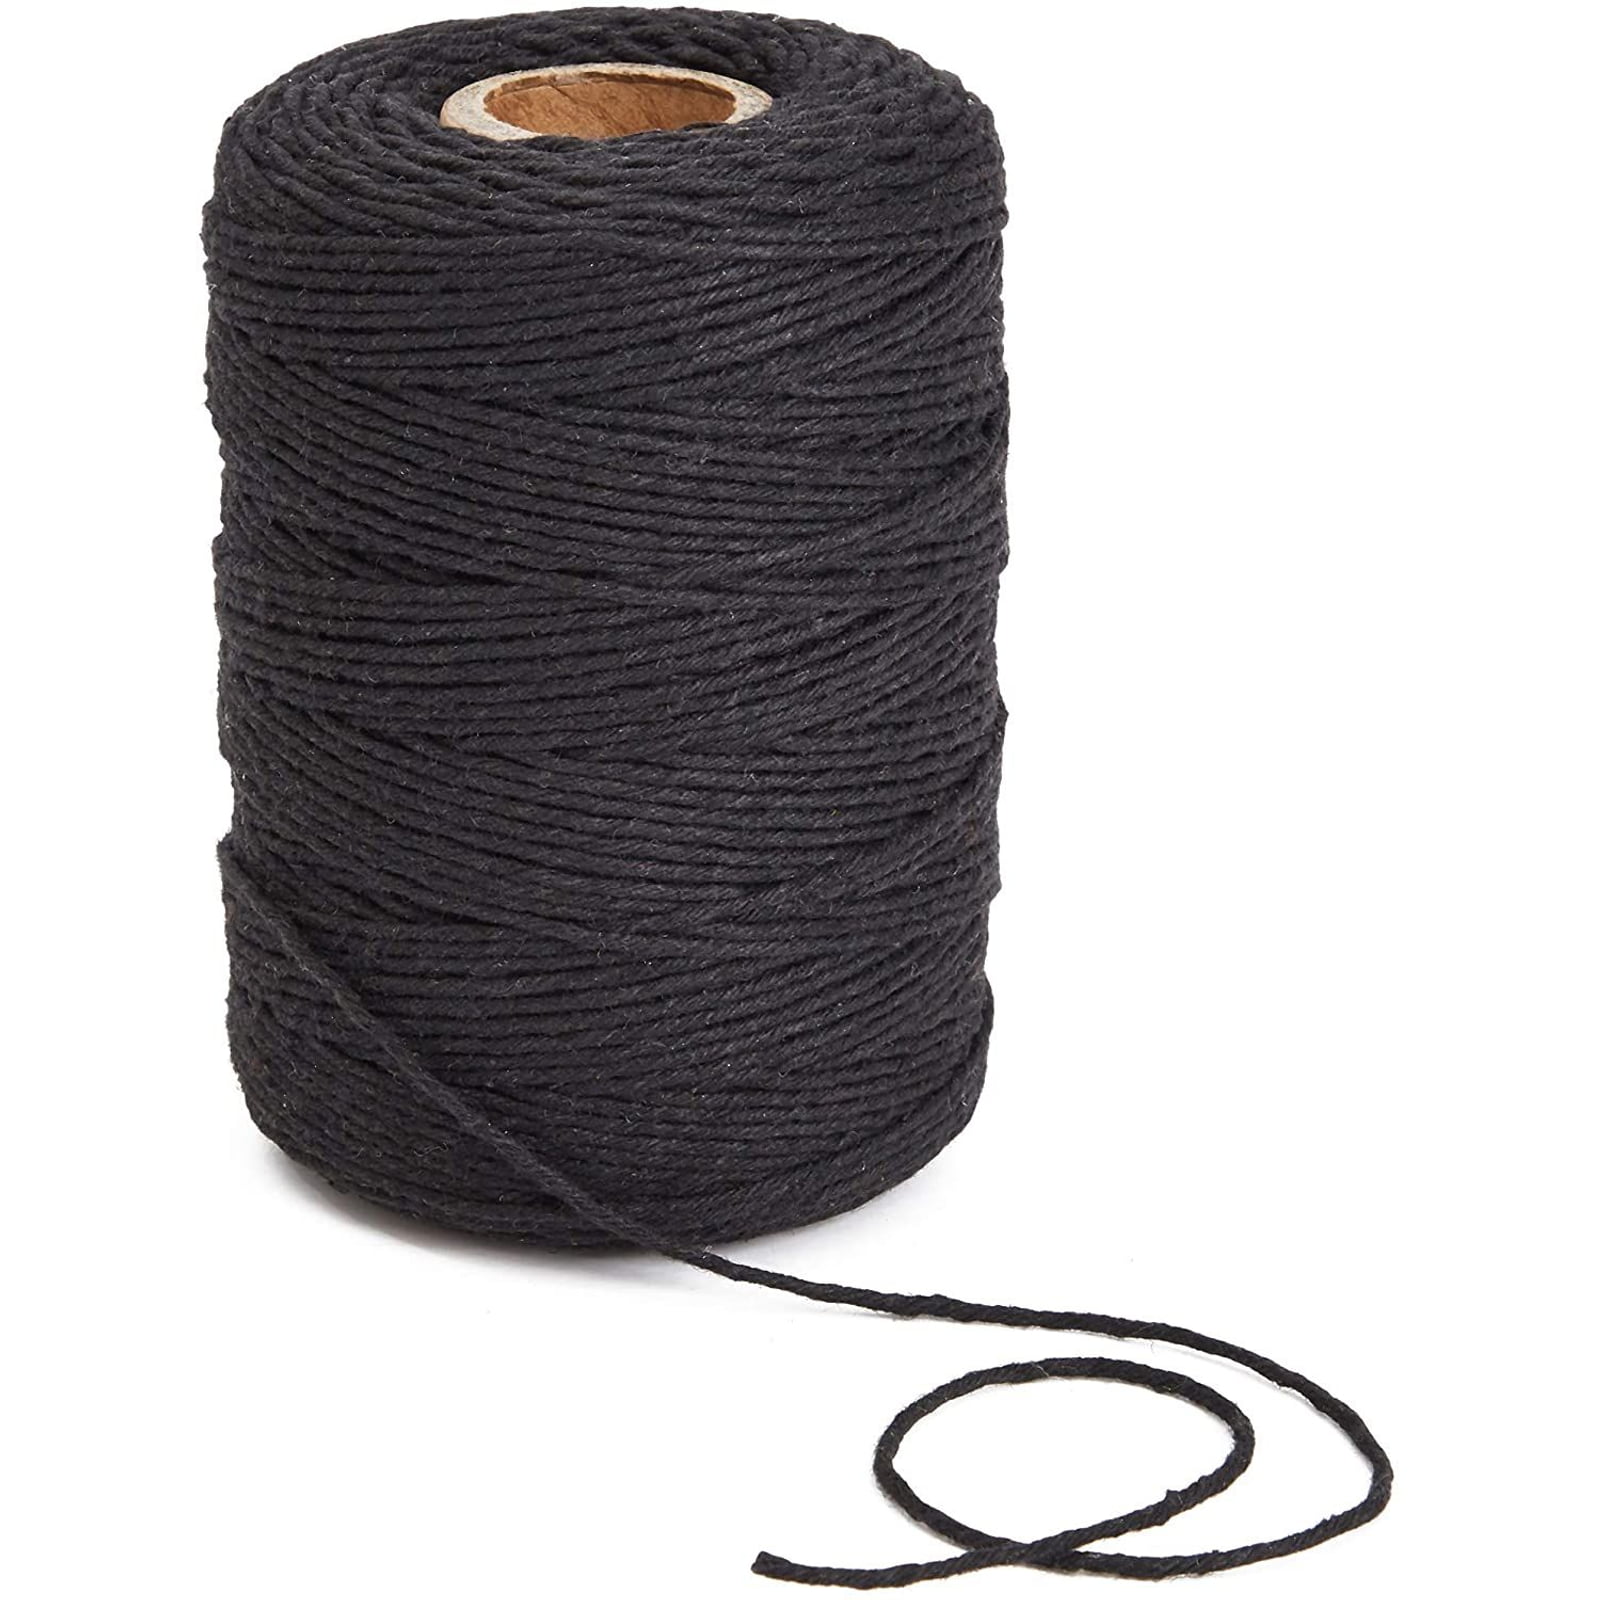 2mm Cotton Black Twine String Rope for DIY Art & Crafts Gift Wrapping  Decorative Packing, 200 yards